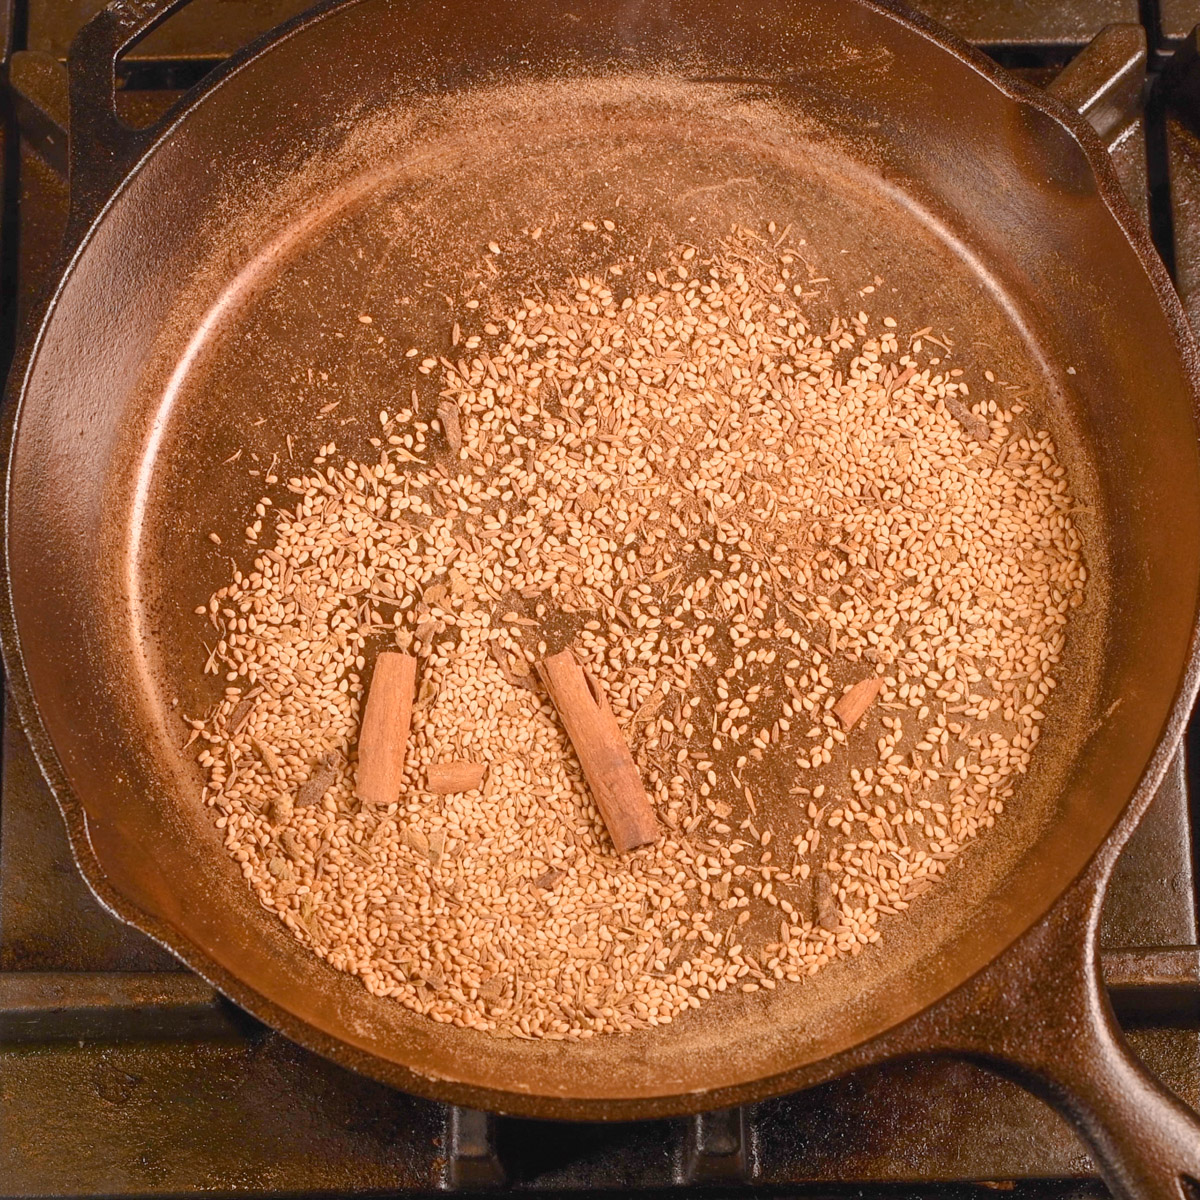 Toast the spices in a hot skillet.